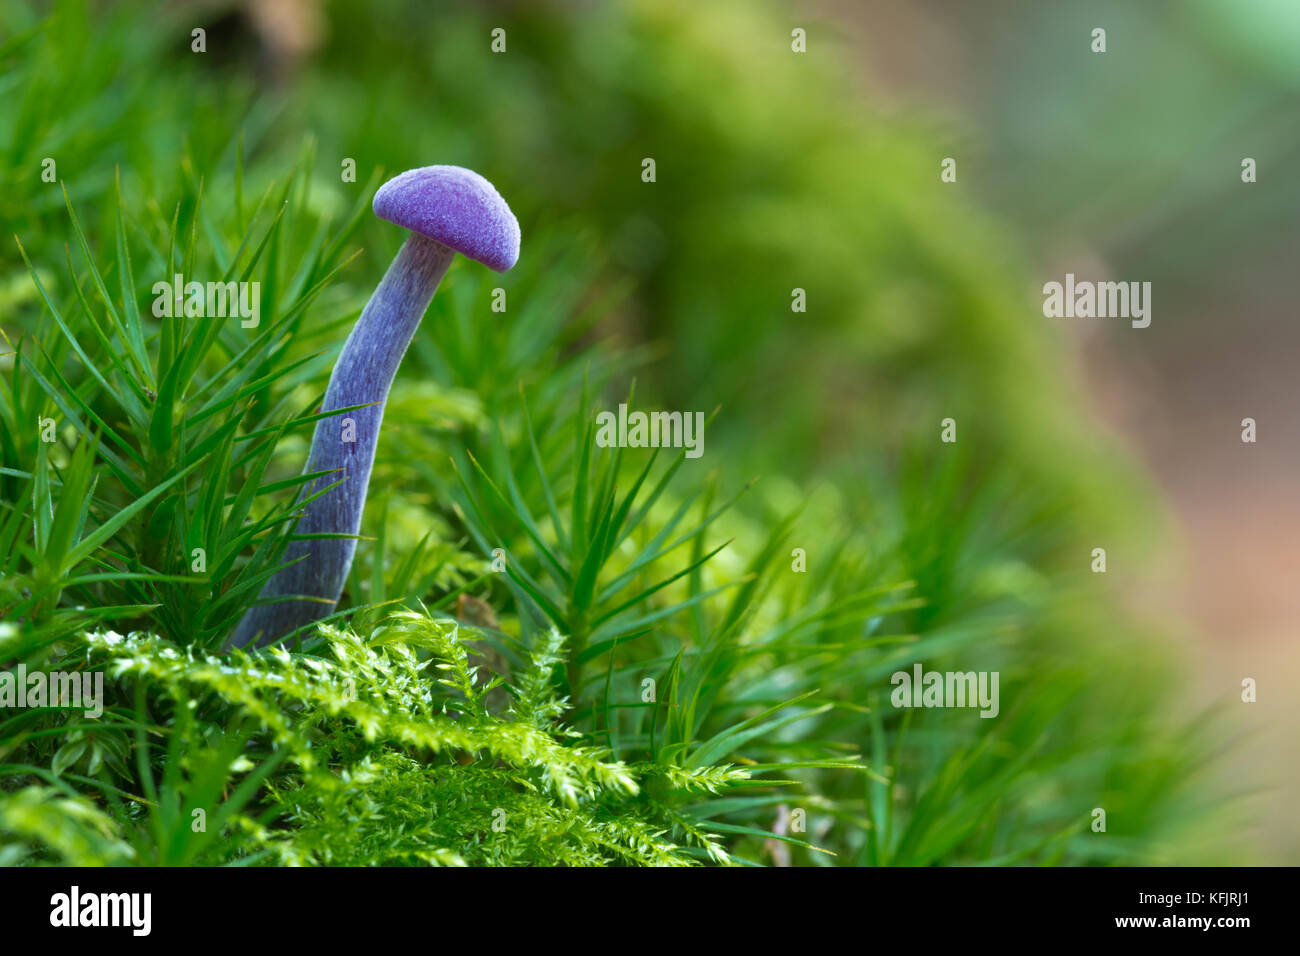 Close-up of a single purple amethyst deceiver (Laccaria amethystina) Banque D'Images